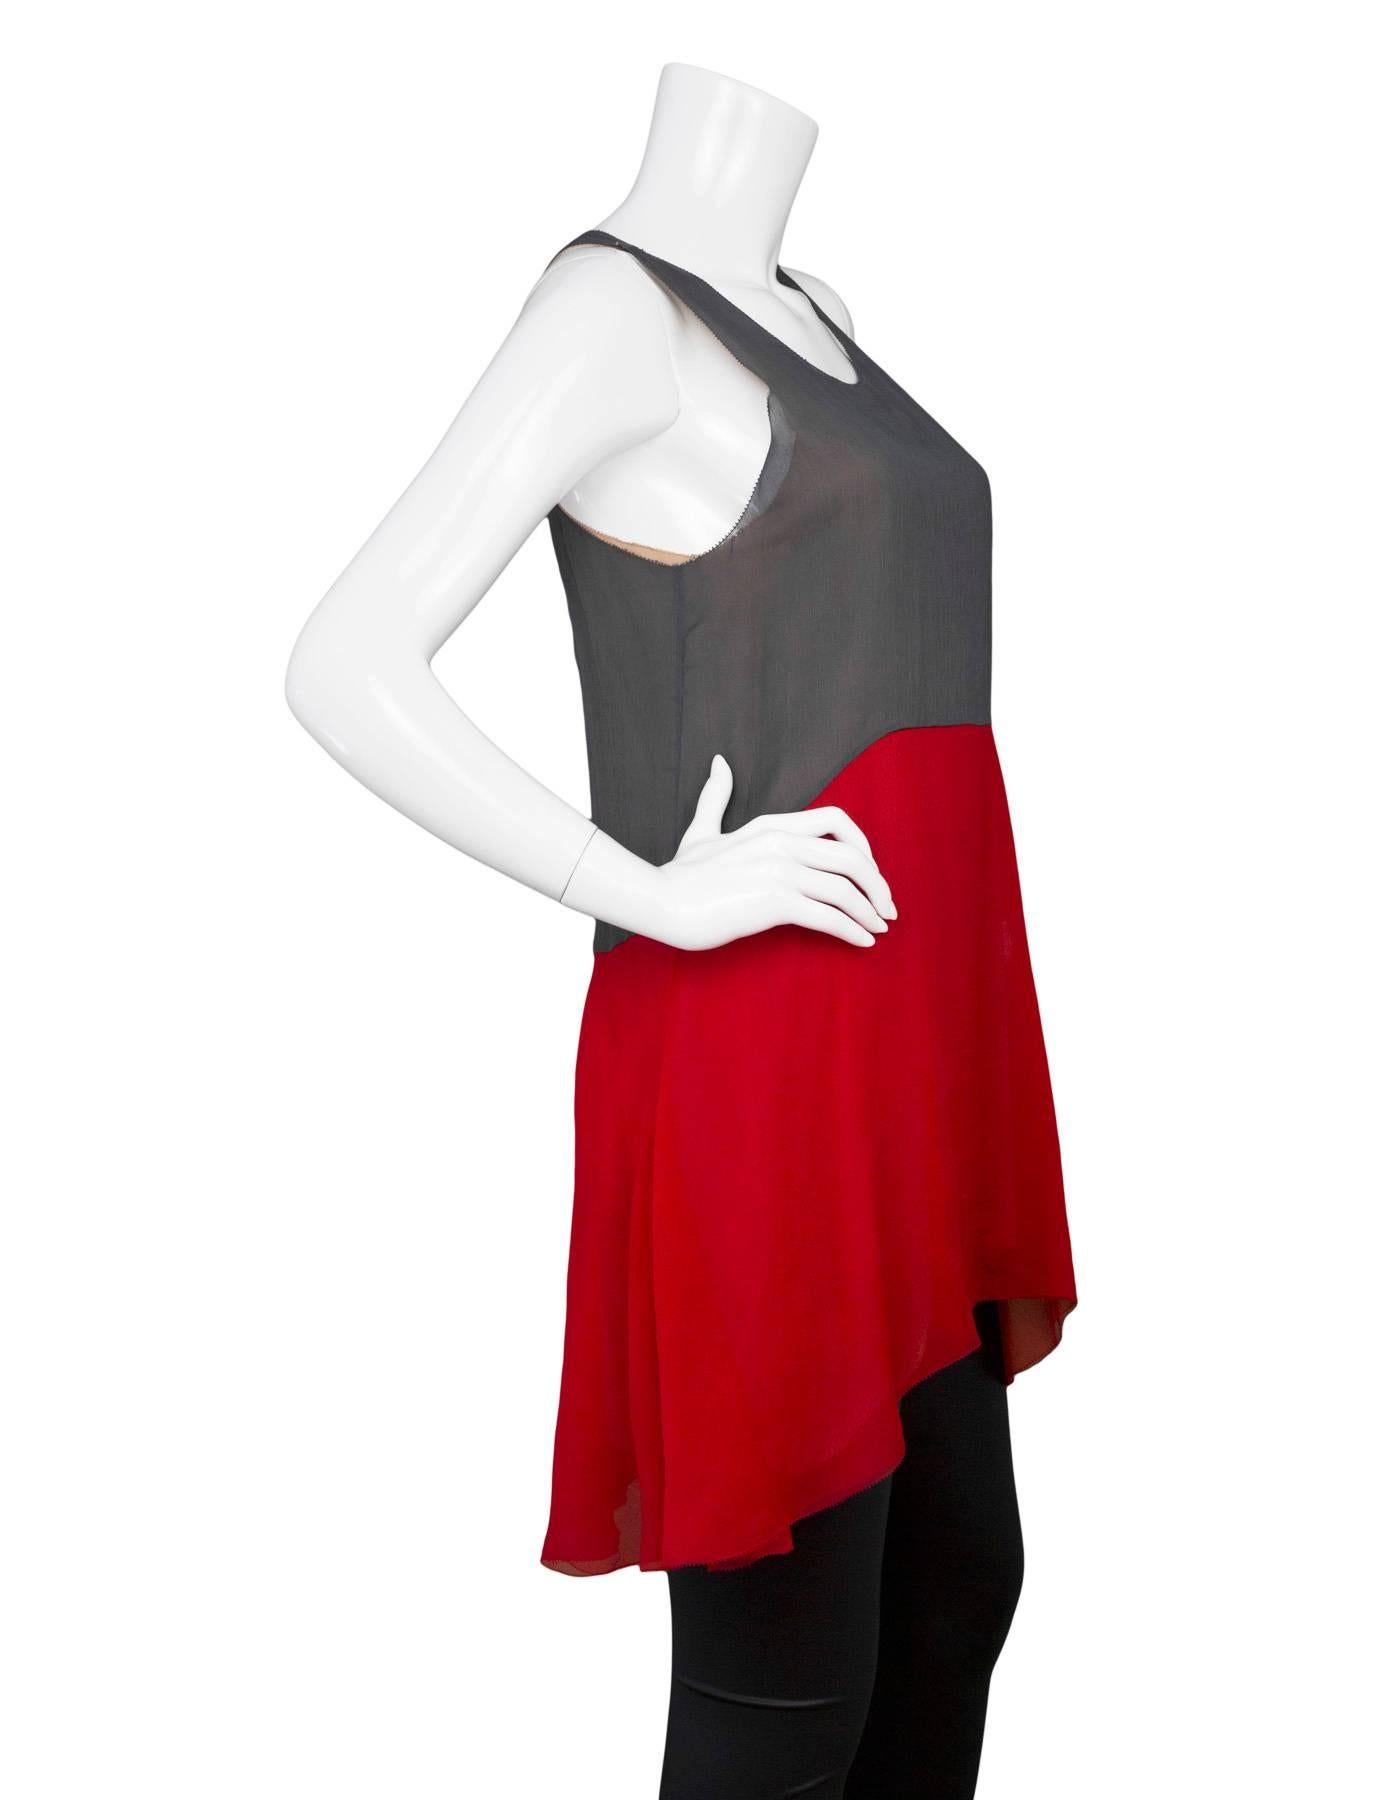 Vera Wang Grey & Red Color Block Sleeveless Top
Features nude silk underlay

Made In: China
Color: Grey and red
Composition: 100% silk
Lining: Nude, 92% silk, 8% lycra
Closure/Opening: Pull over 
Exterior Pockets: None
Interior Pockets: